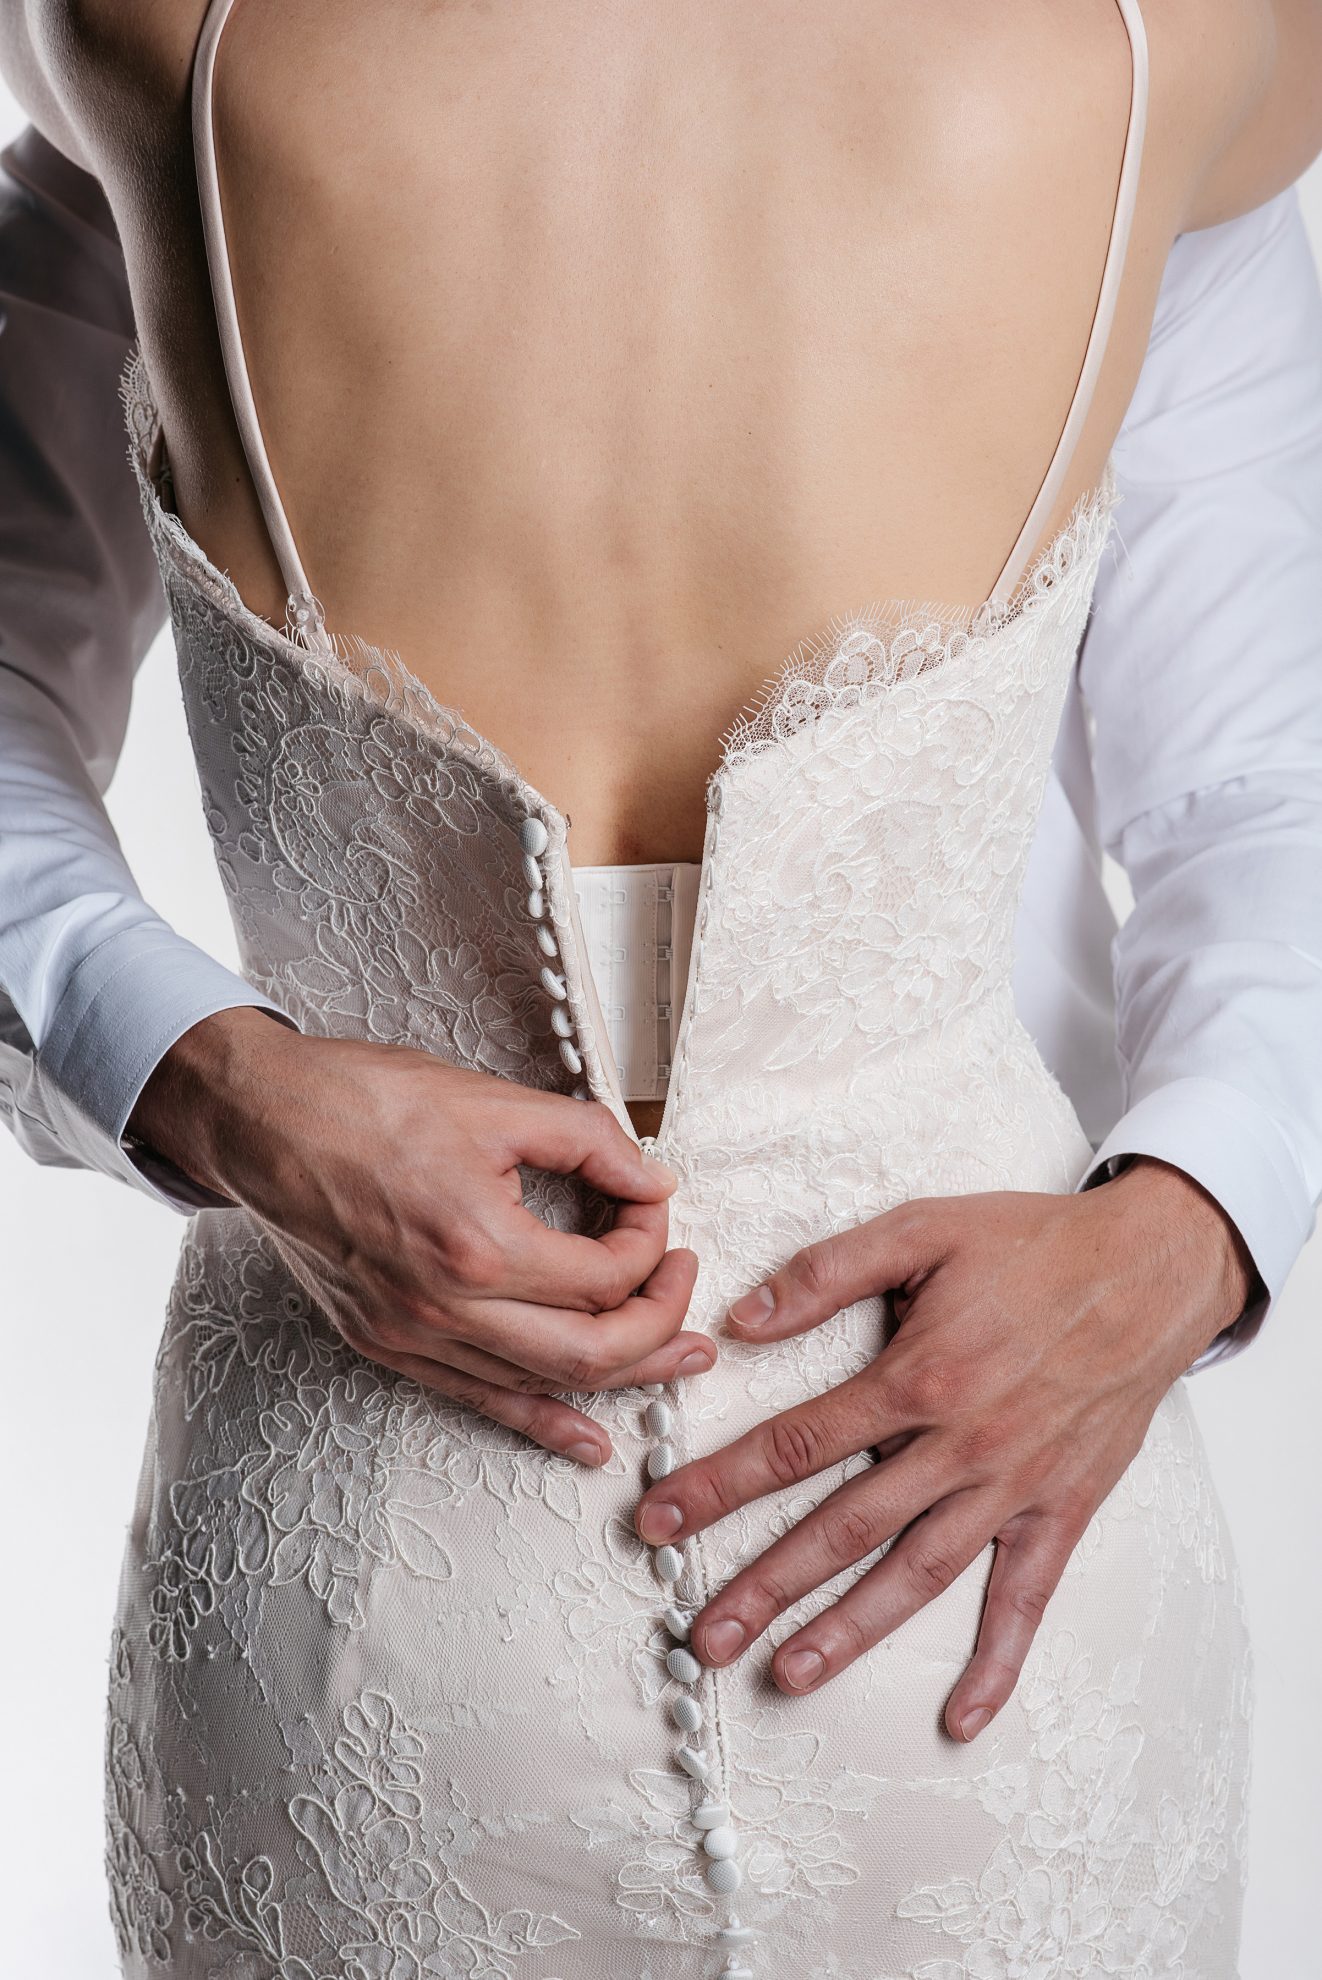 How Many Couples REALLY Have Sex On Their Wedding Night?